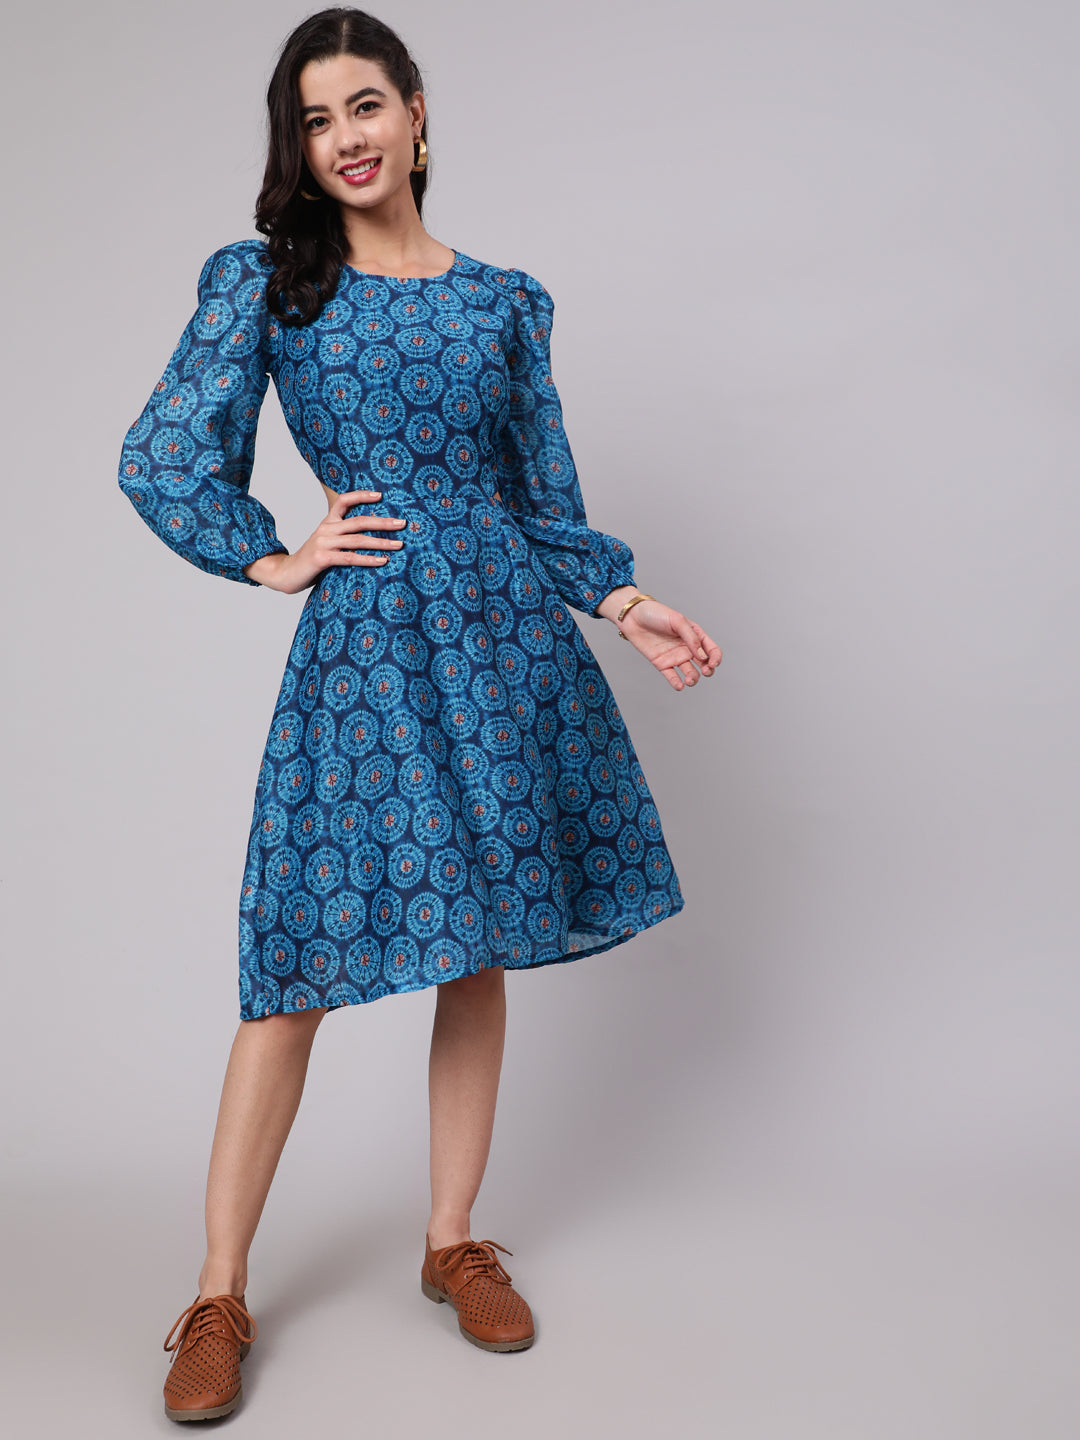 Mother Daughter Combo-Blue Printed Cut-Out Skater Dress